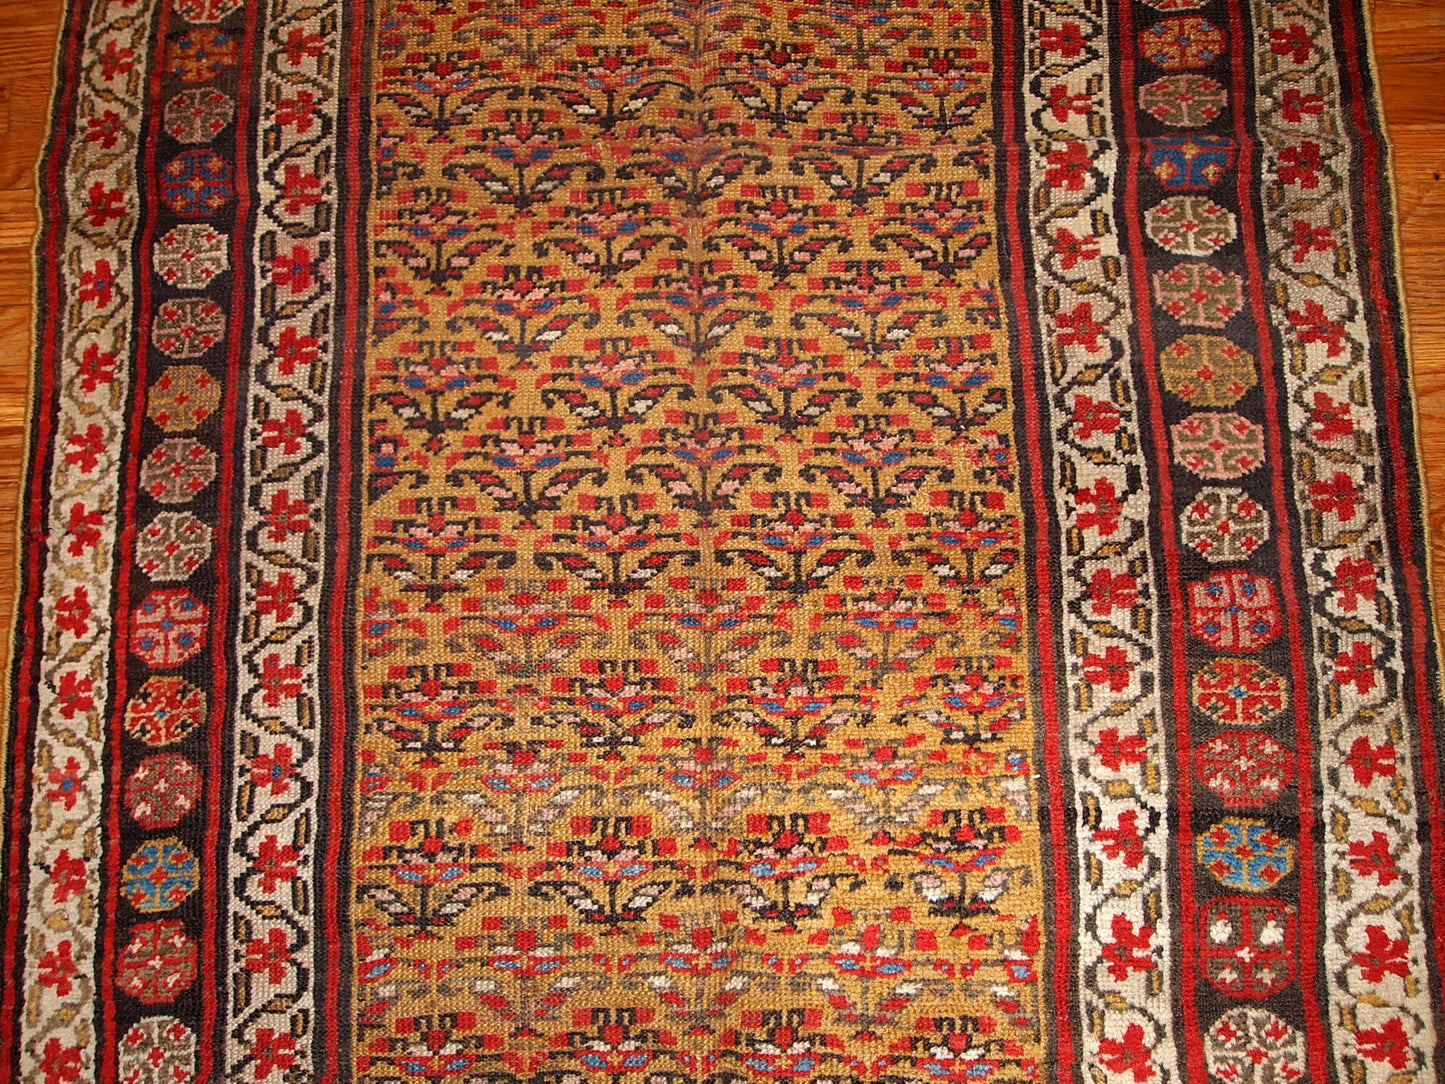 Antique Persian Kurdish rug in yellow, white and red  colors. The rug is from the end of 19th century, in good condition.